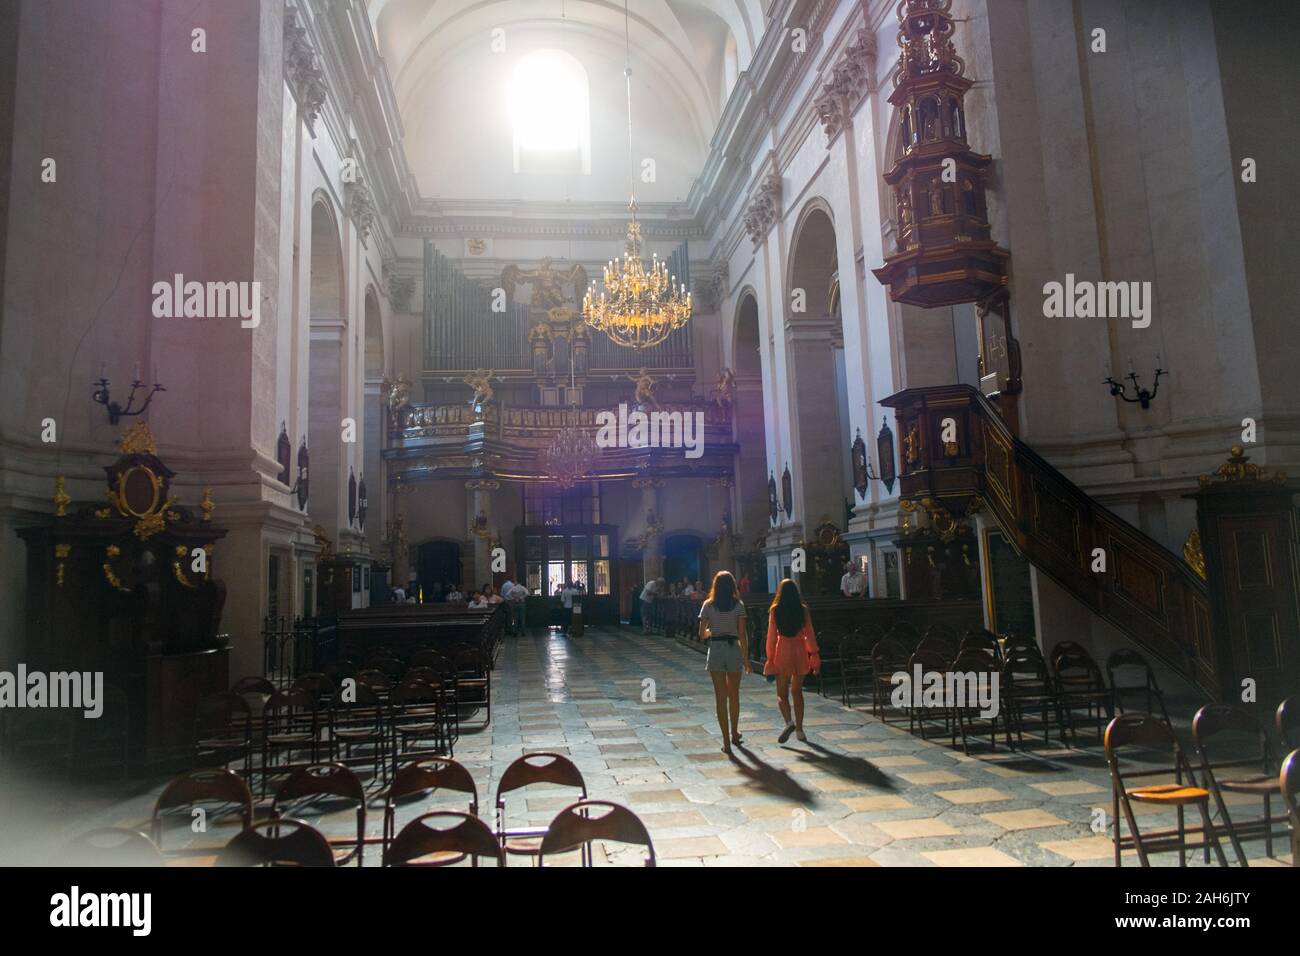 Two young women inside Saints Peter and Paul Church, Kraków, Poland Stock Photo